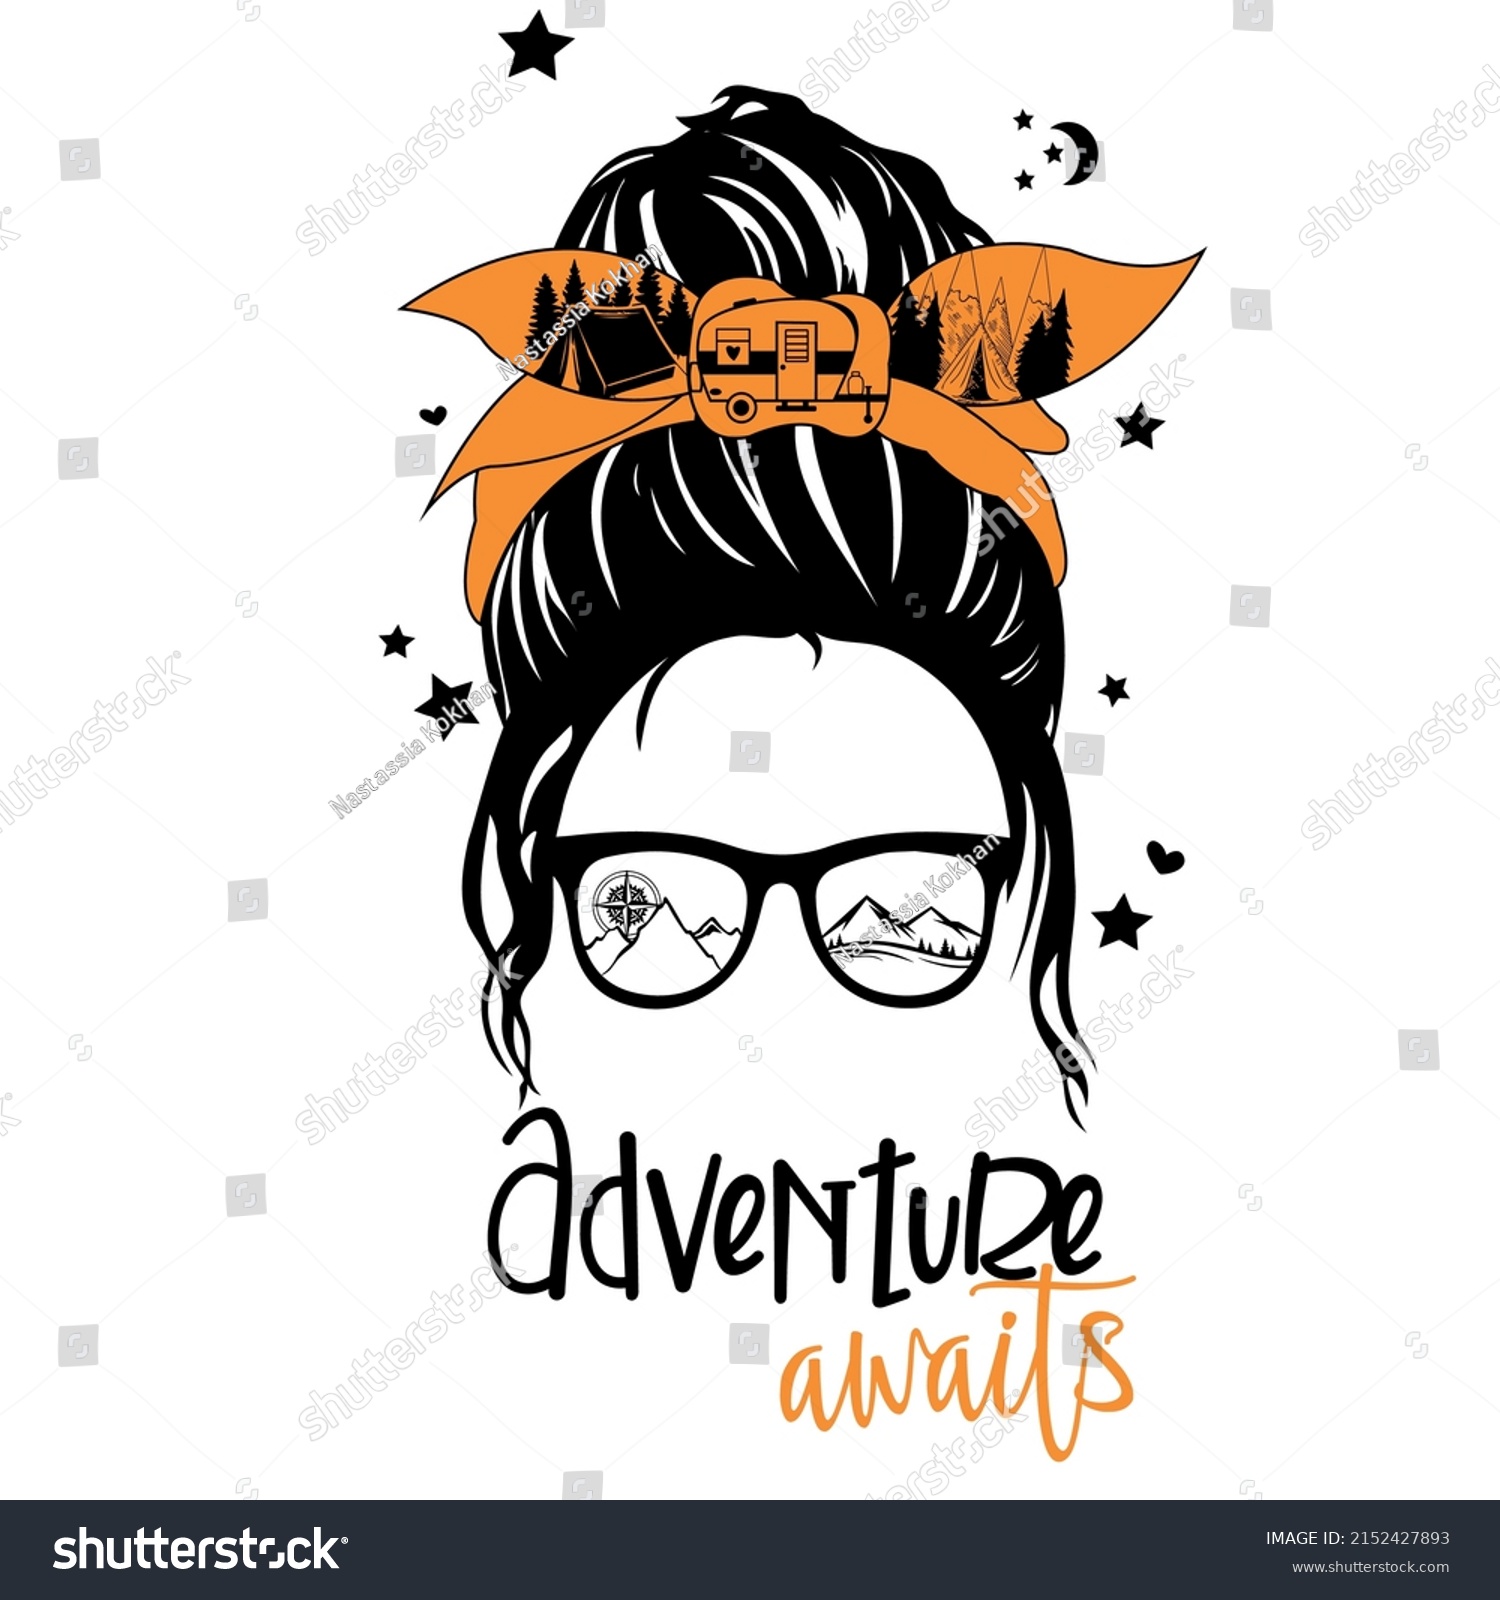 SVG of Adventure awaits Svg vector Illustration isolated on white background. Camping messy bun shirt design. Camping trailer. Camping sunglasses with mountains svg